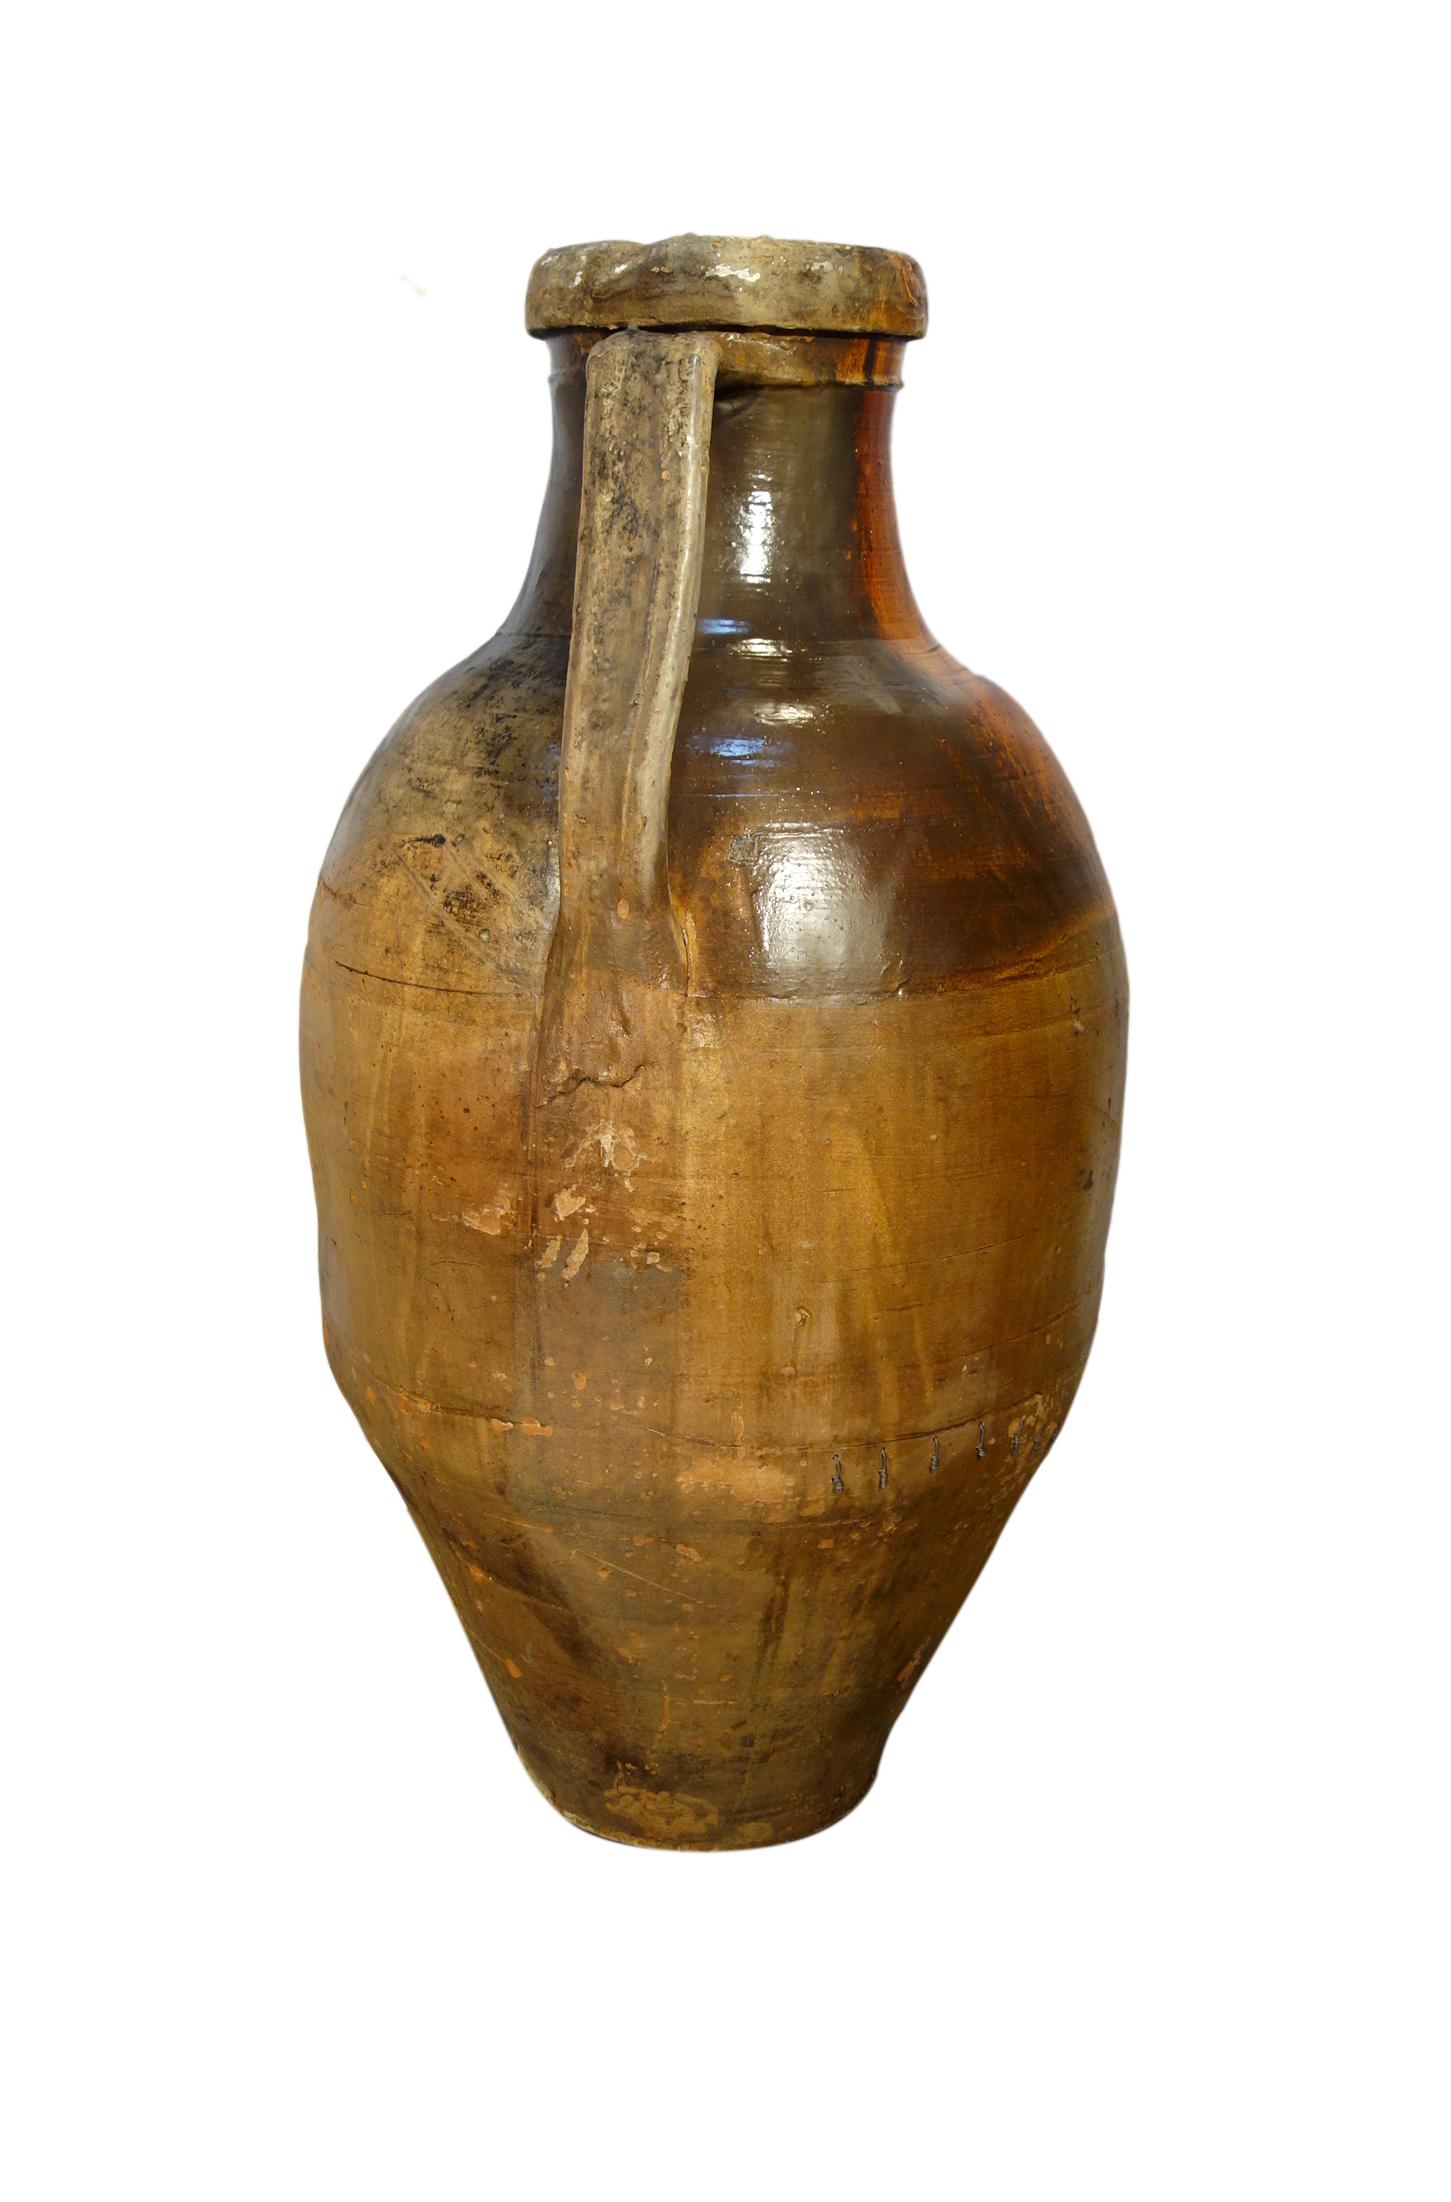 Antique Italian Orcio Puglia; large terracotta vessel with ochre & umber glaze.
Authentic Mediterranean antique pottery, two-handled amphora jar from Apulia region of southern Italy. 
Handcrafted earthenware of terracotta with unique Majolica